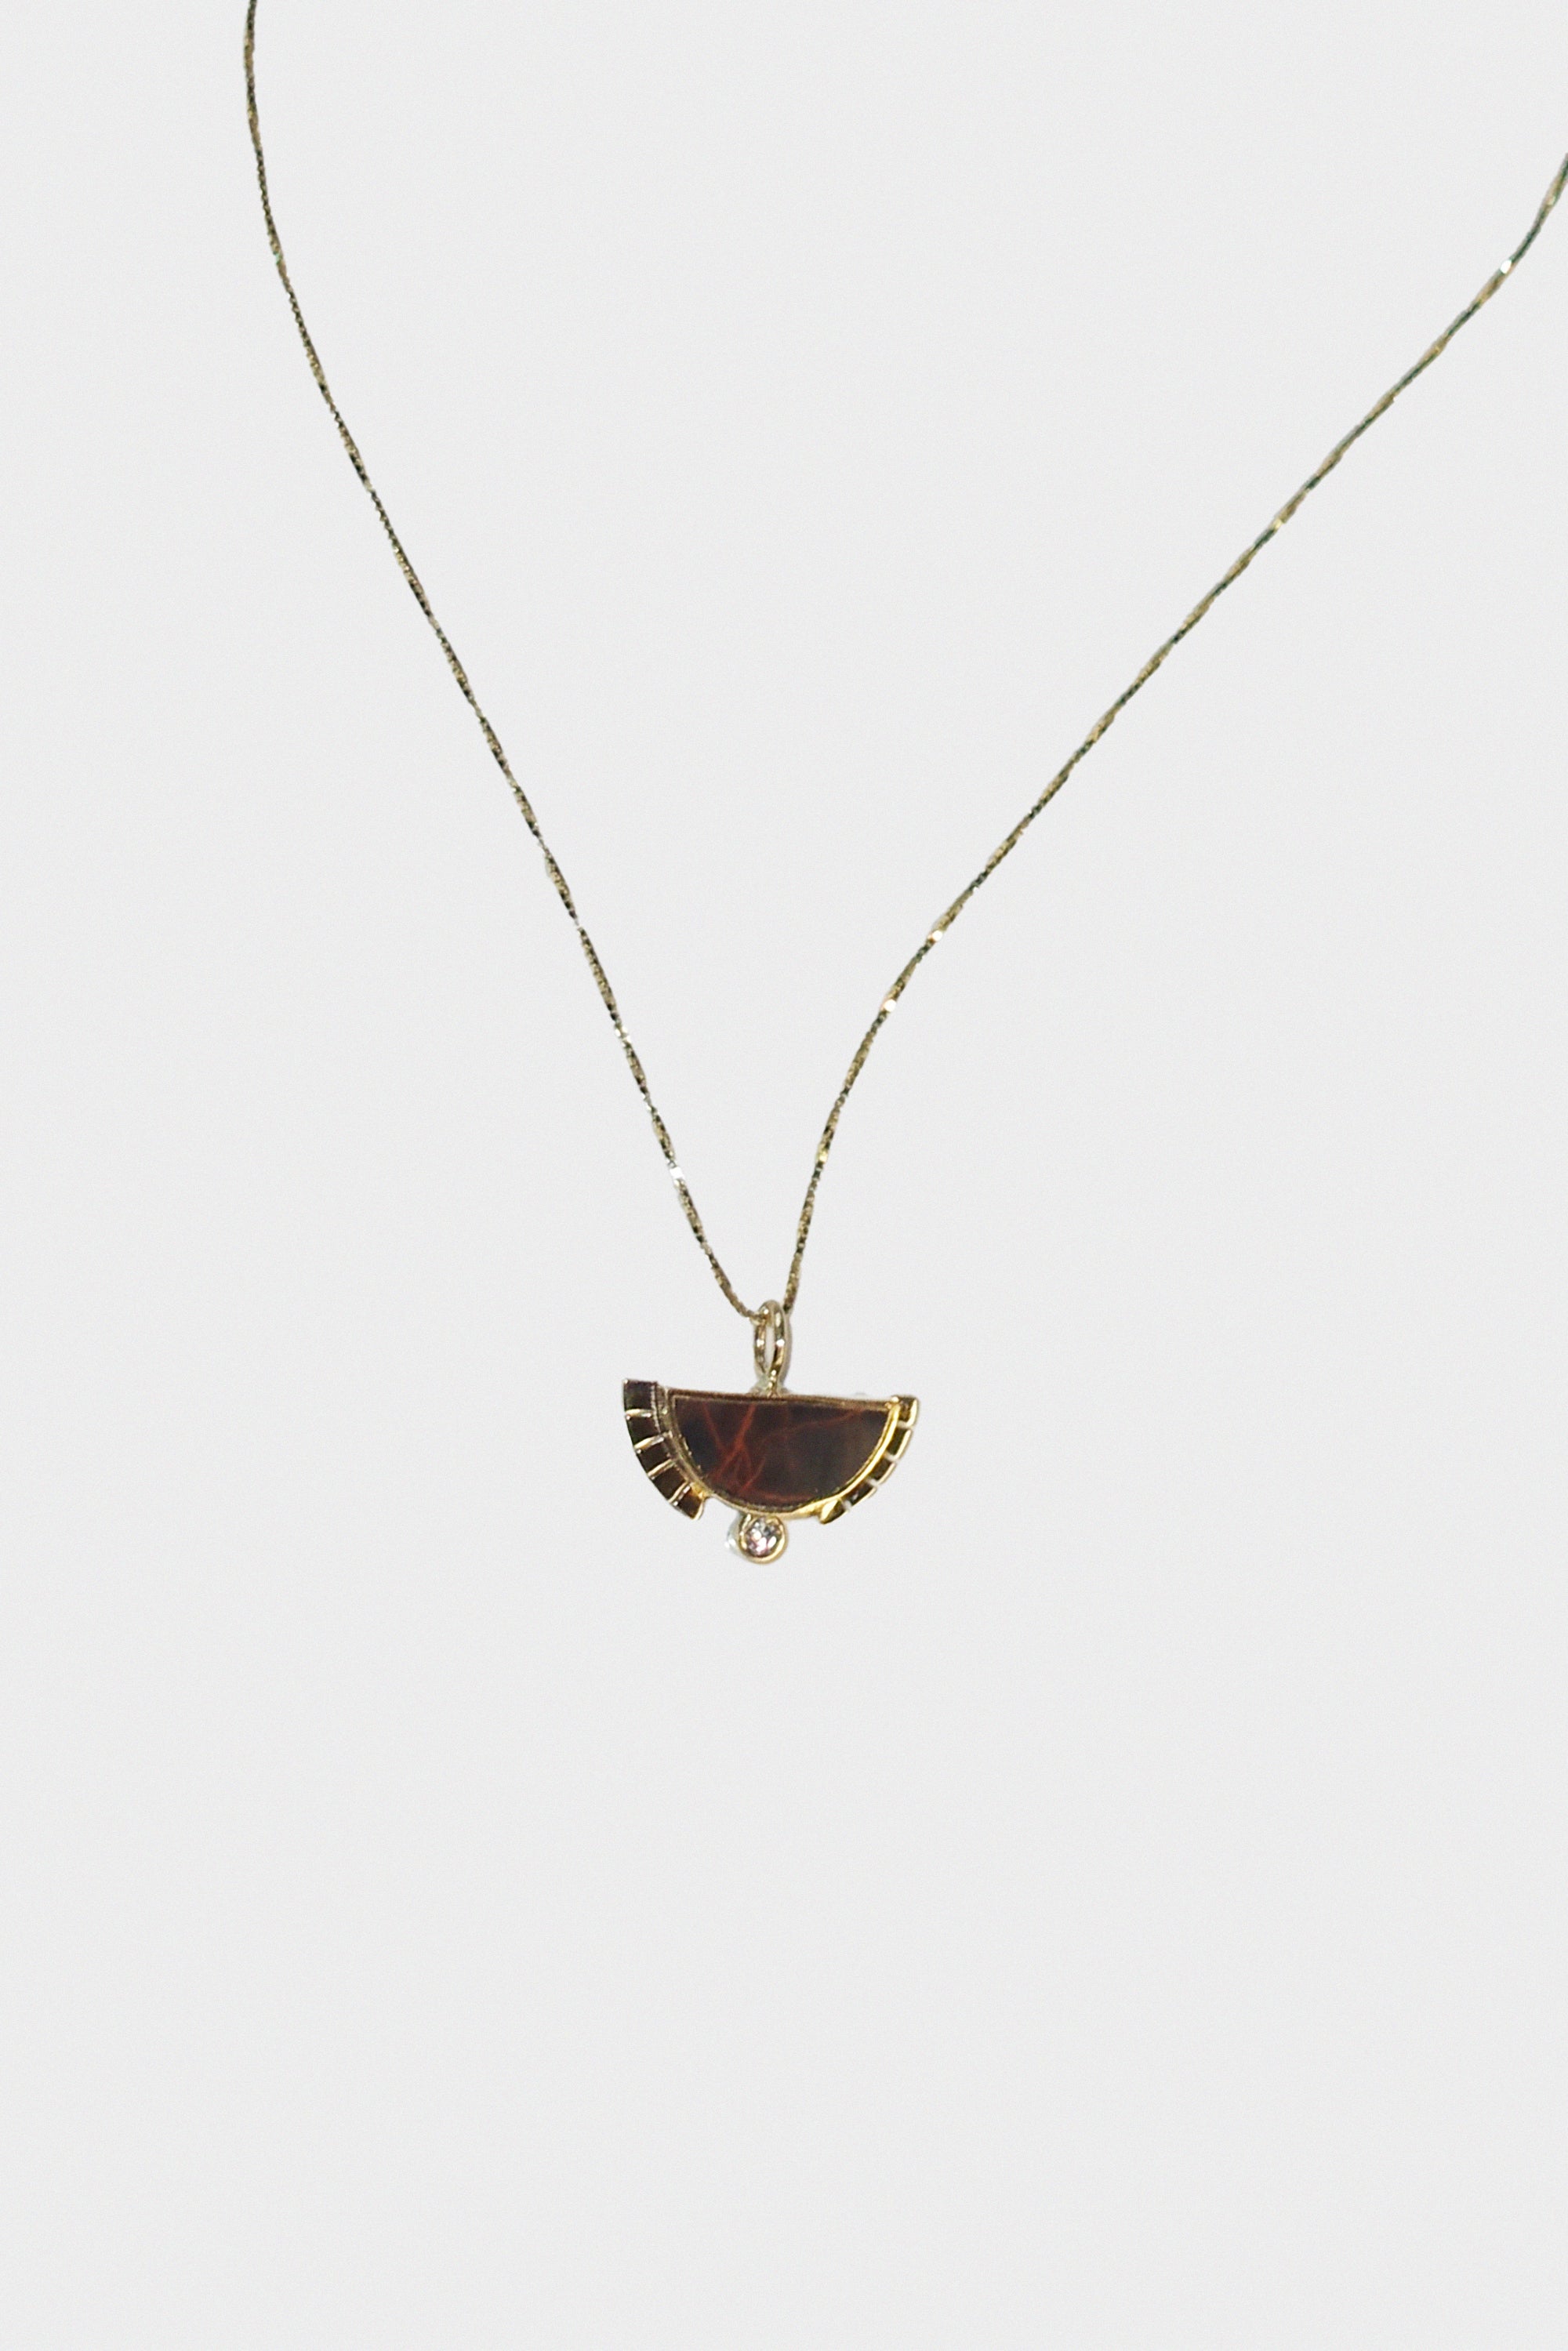 Rising Sol Necklace in 14k Yellow Gold & Mahogany Obsidian